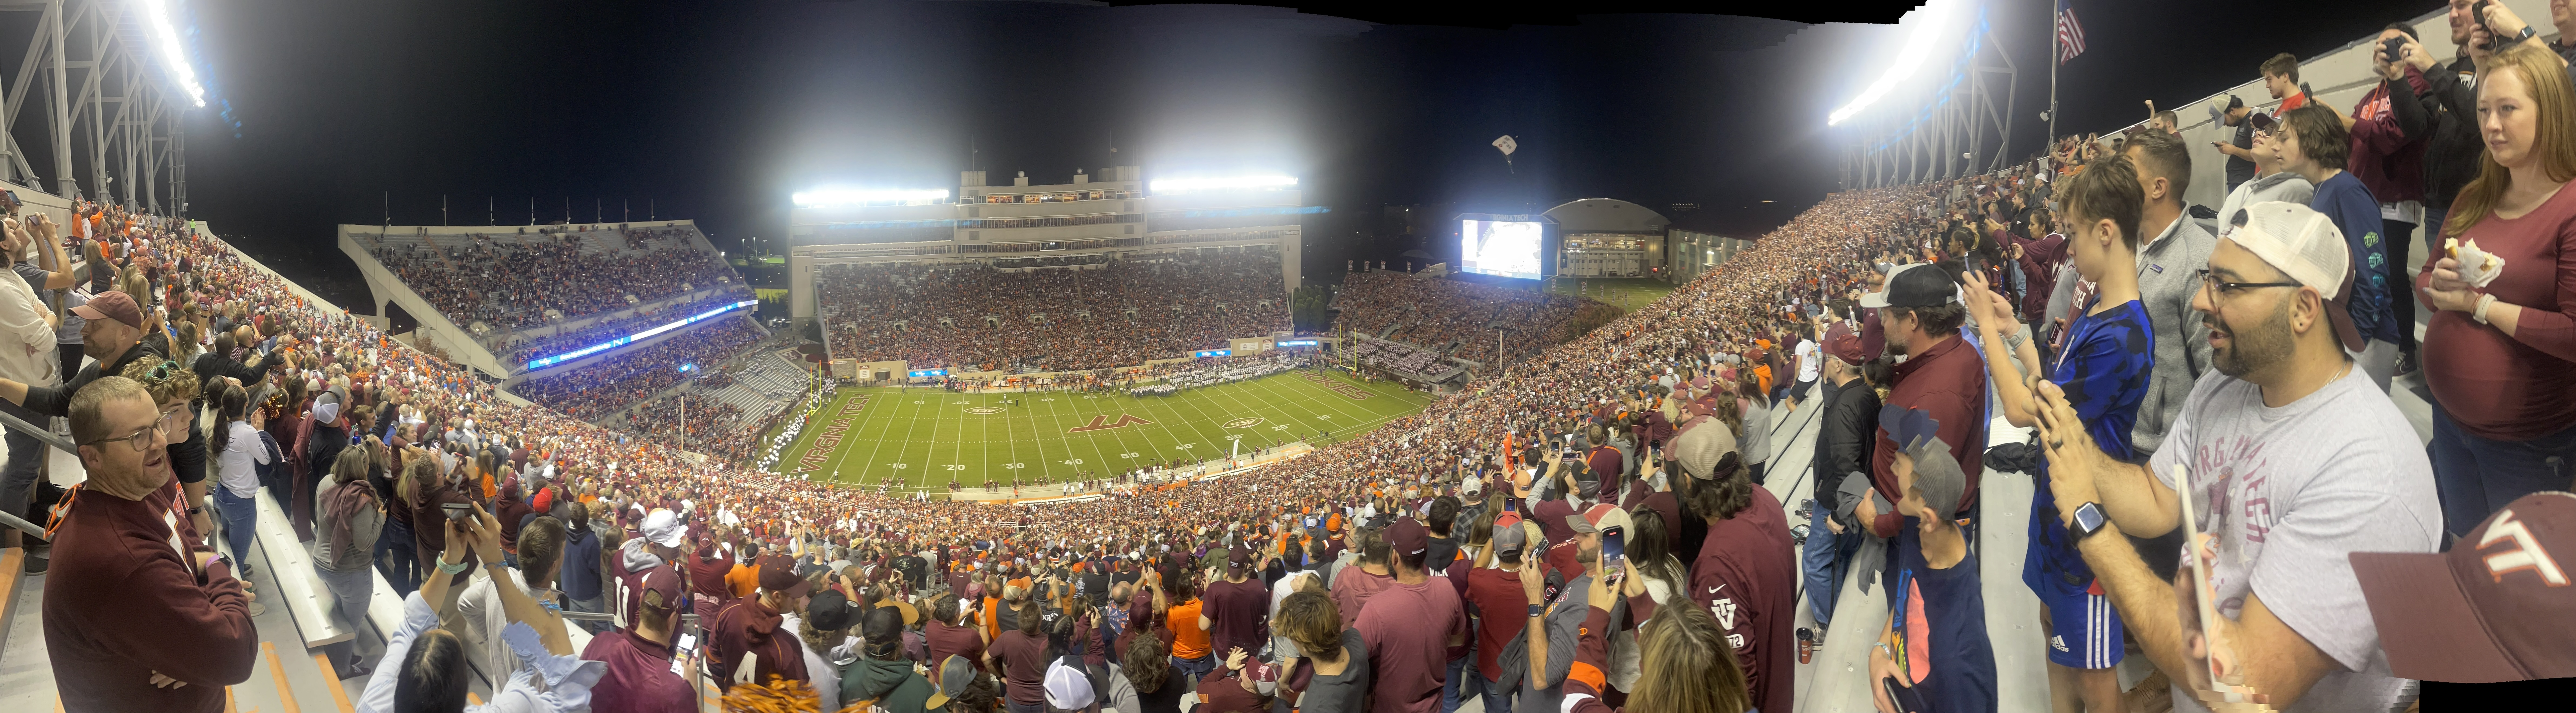 College football is a big part of life in the US. The Mining and Minerals Advisory Board participates in the Virginia Tech football games, along with 65,000 other fans.